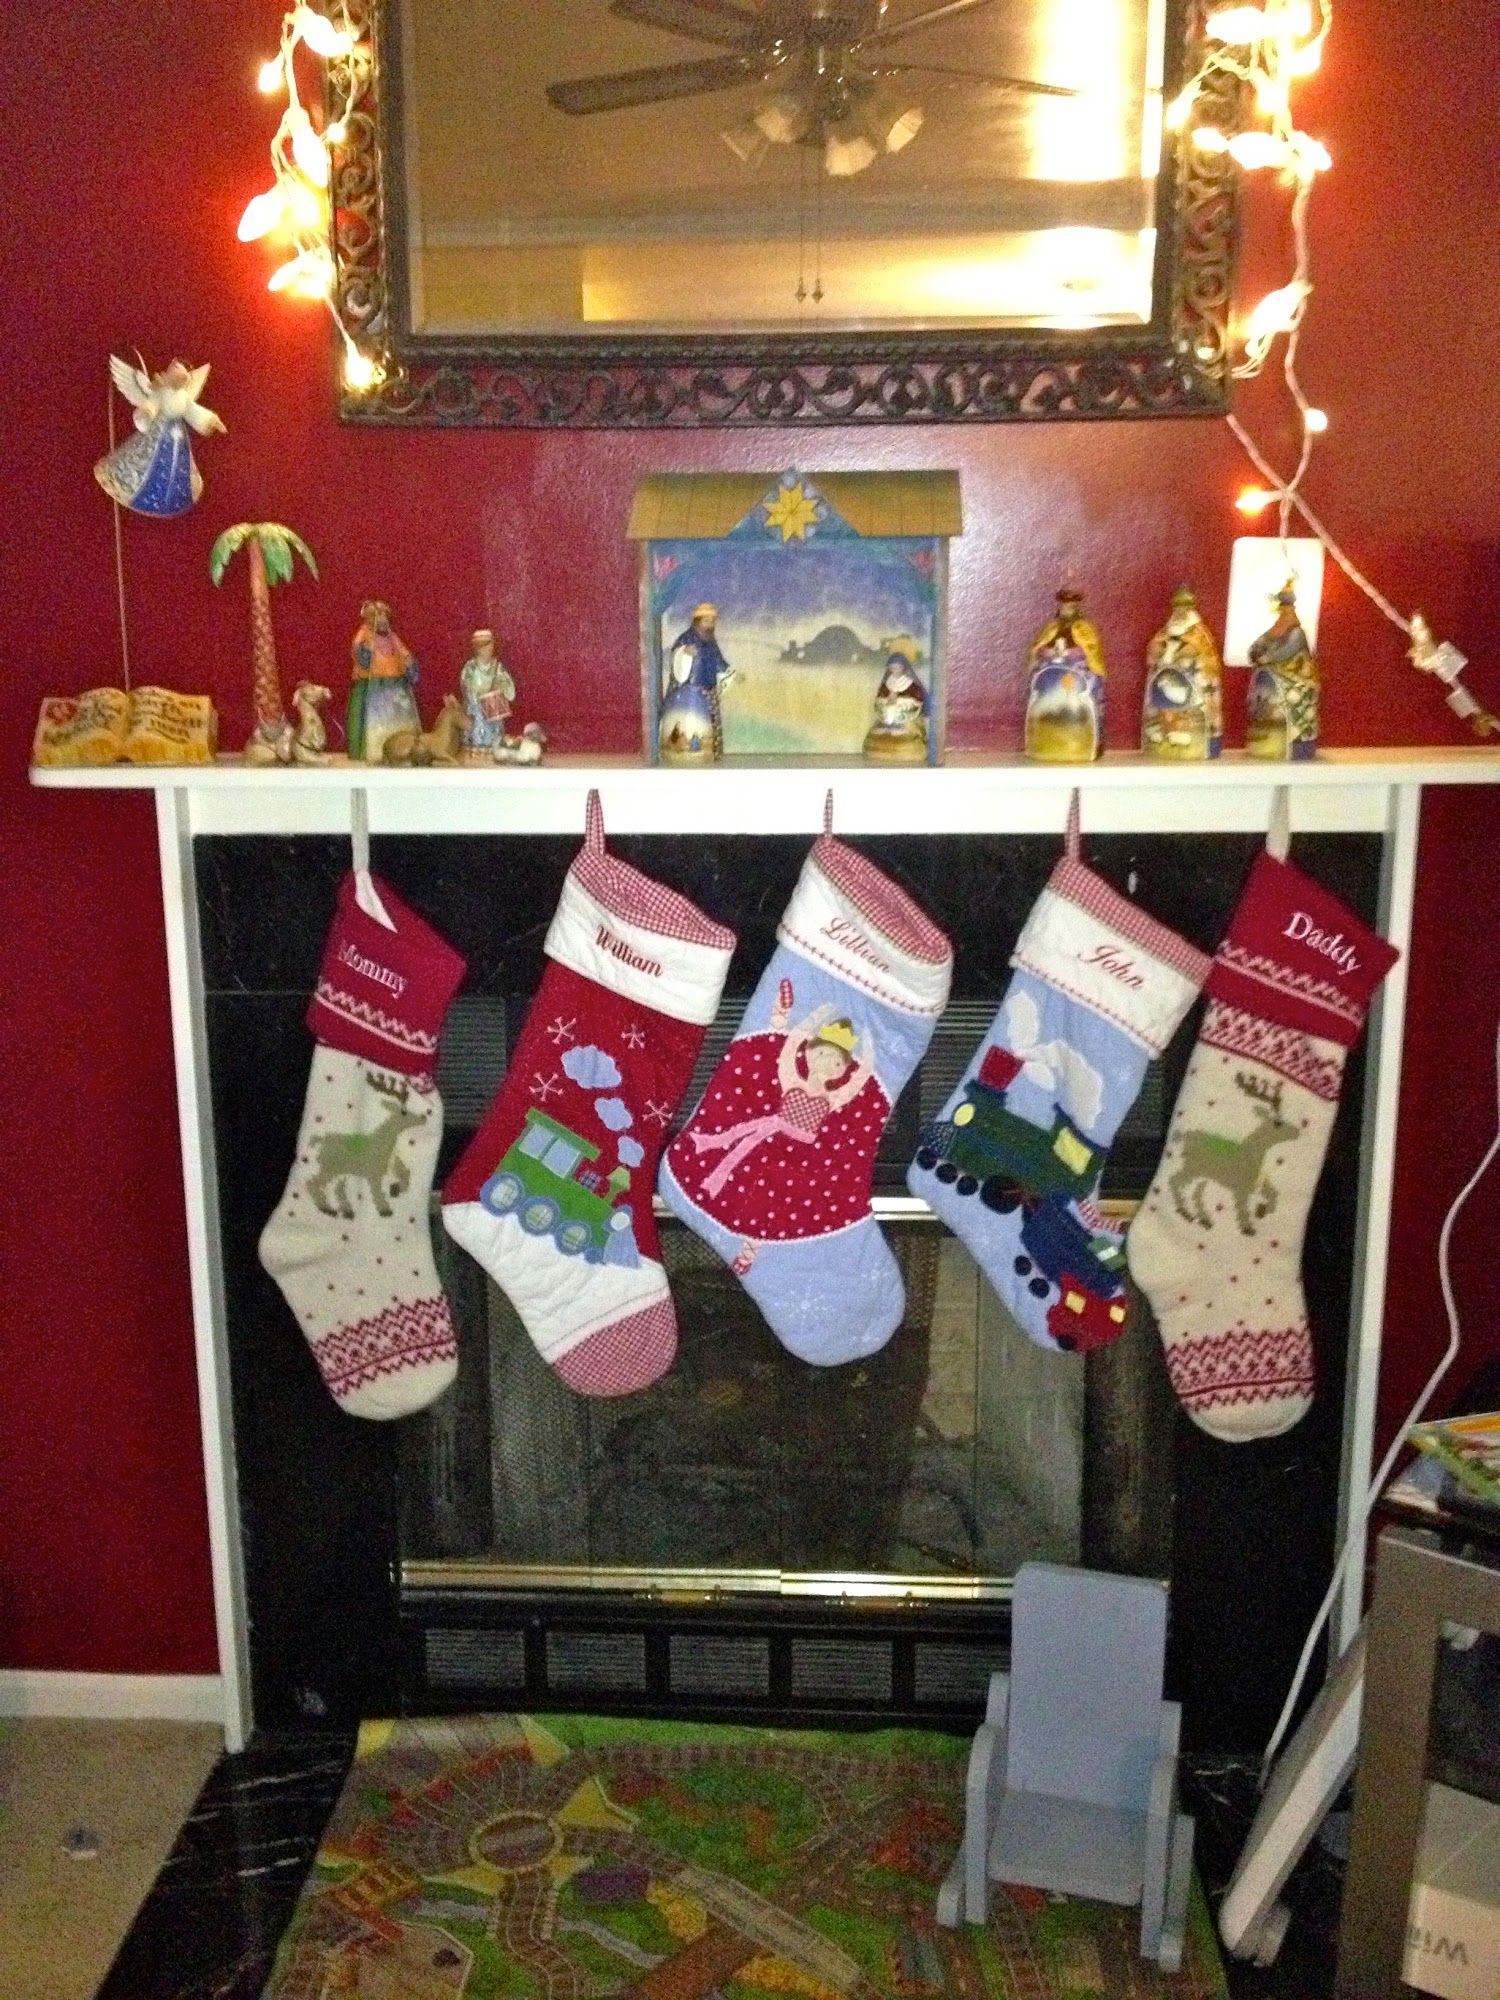  My favorite Christmas decorations: Stockings and a Jim Shore Nativity set 